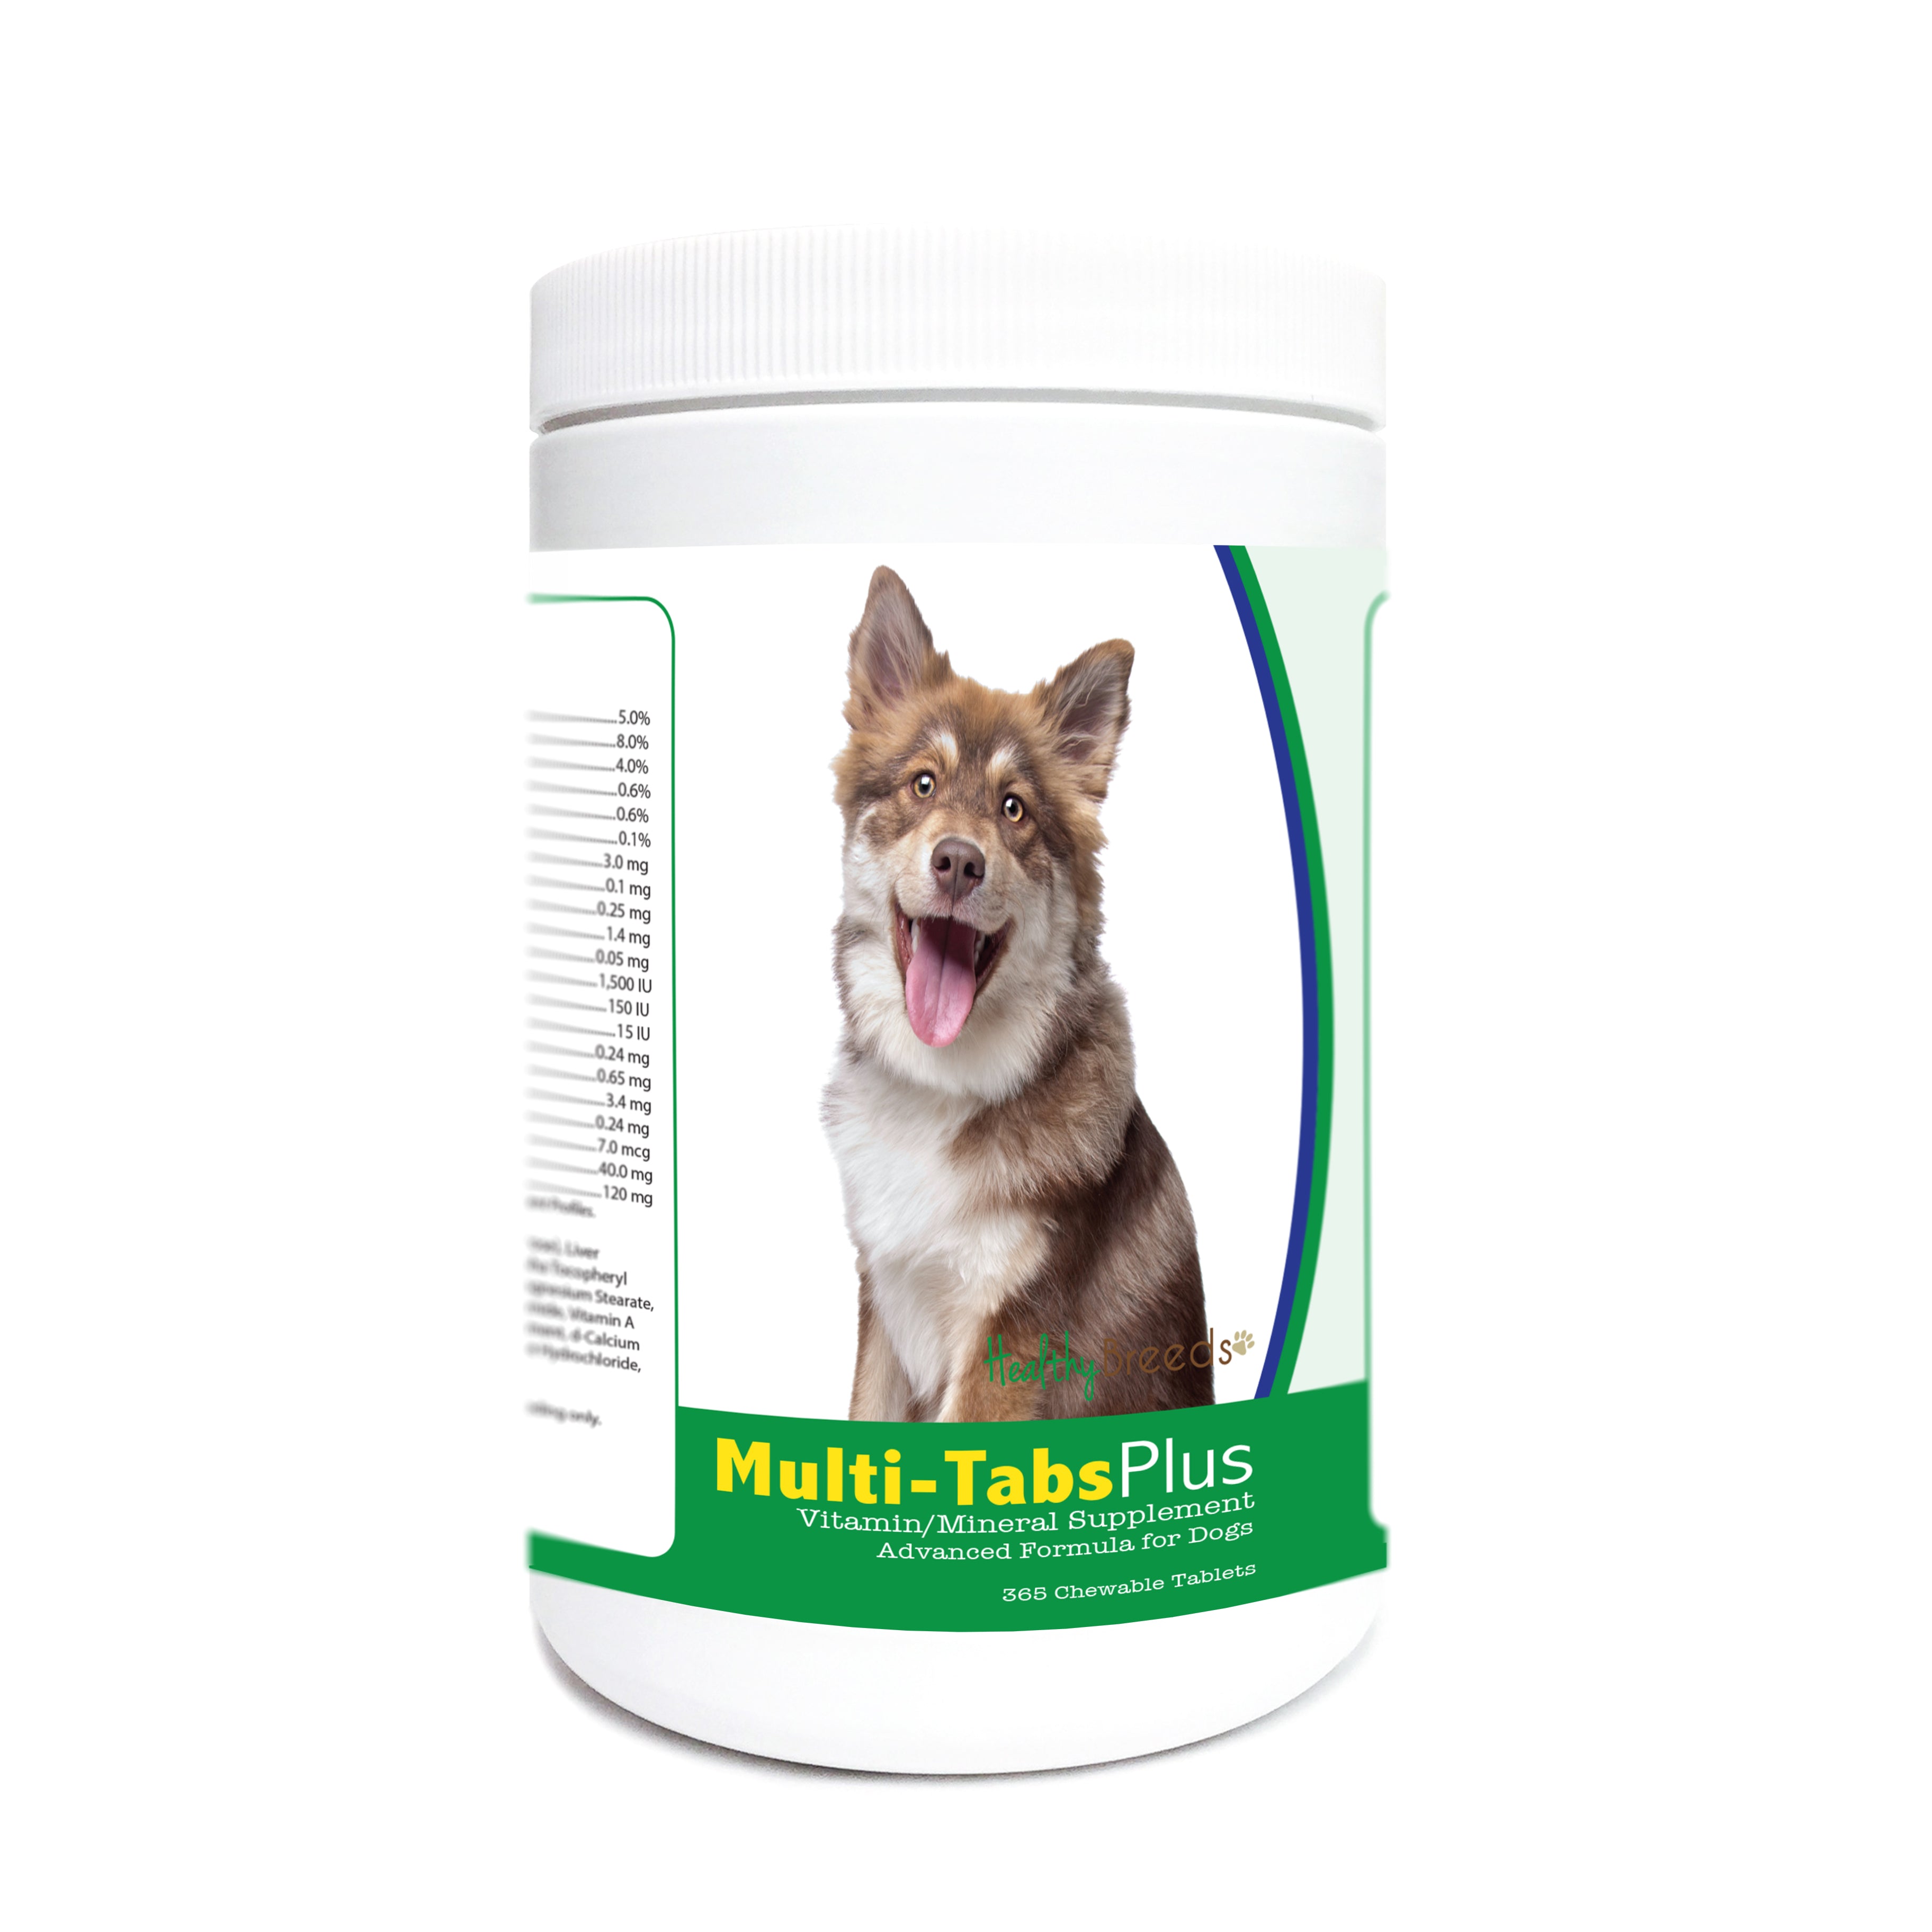 Finnish Lapphund Multi-Tabs Plus Chewable Tablets 365 Count